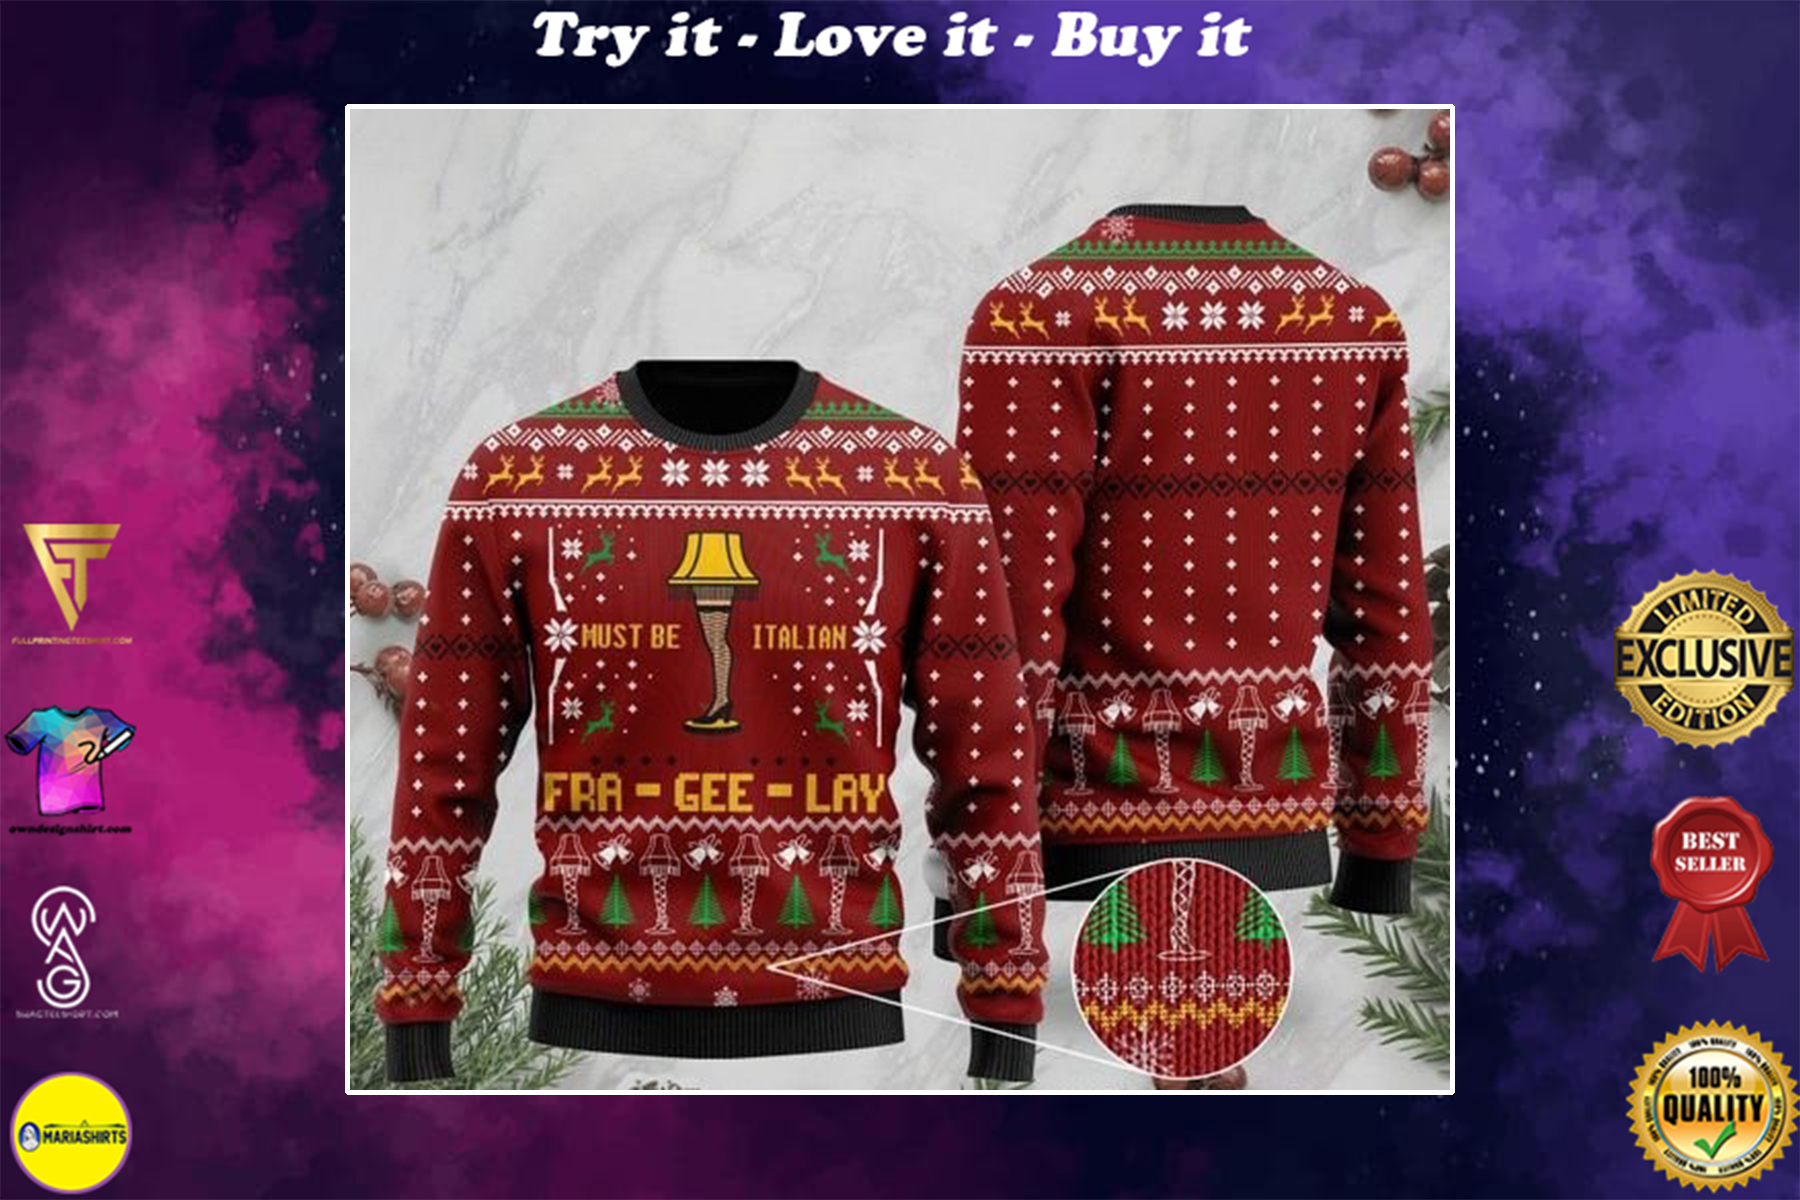 christmas must be italian fra-gee-lay full printing ugly sweater